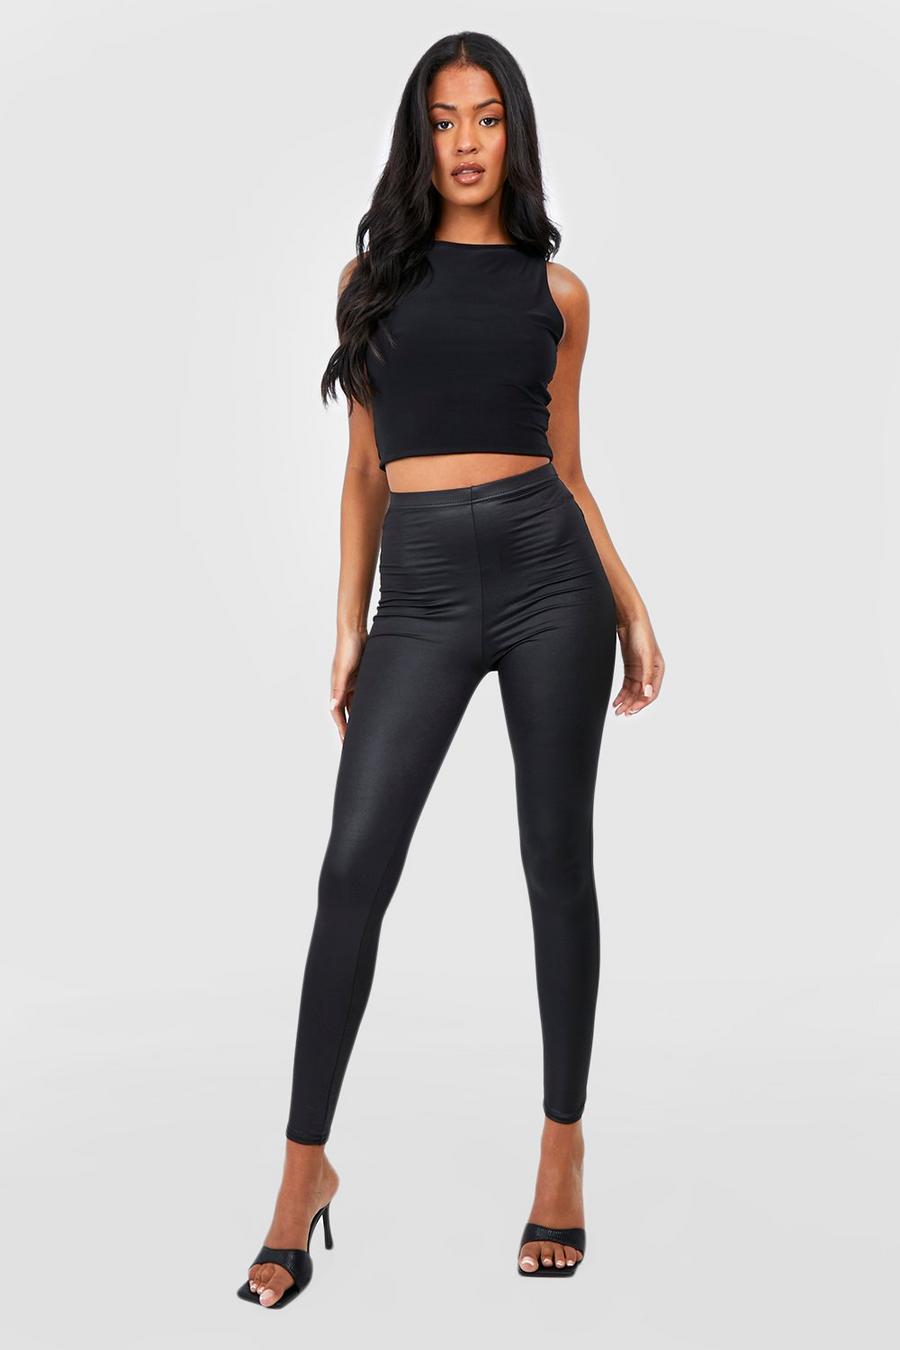 Black negro Tall Leather Look High Waisted Leggings